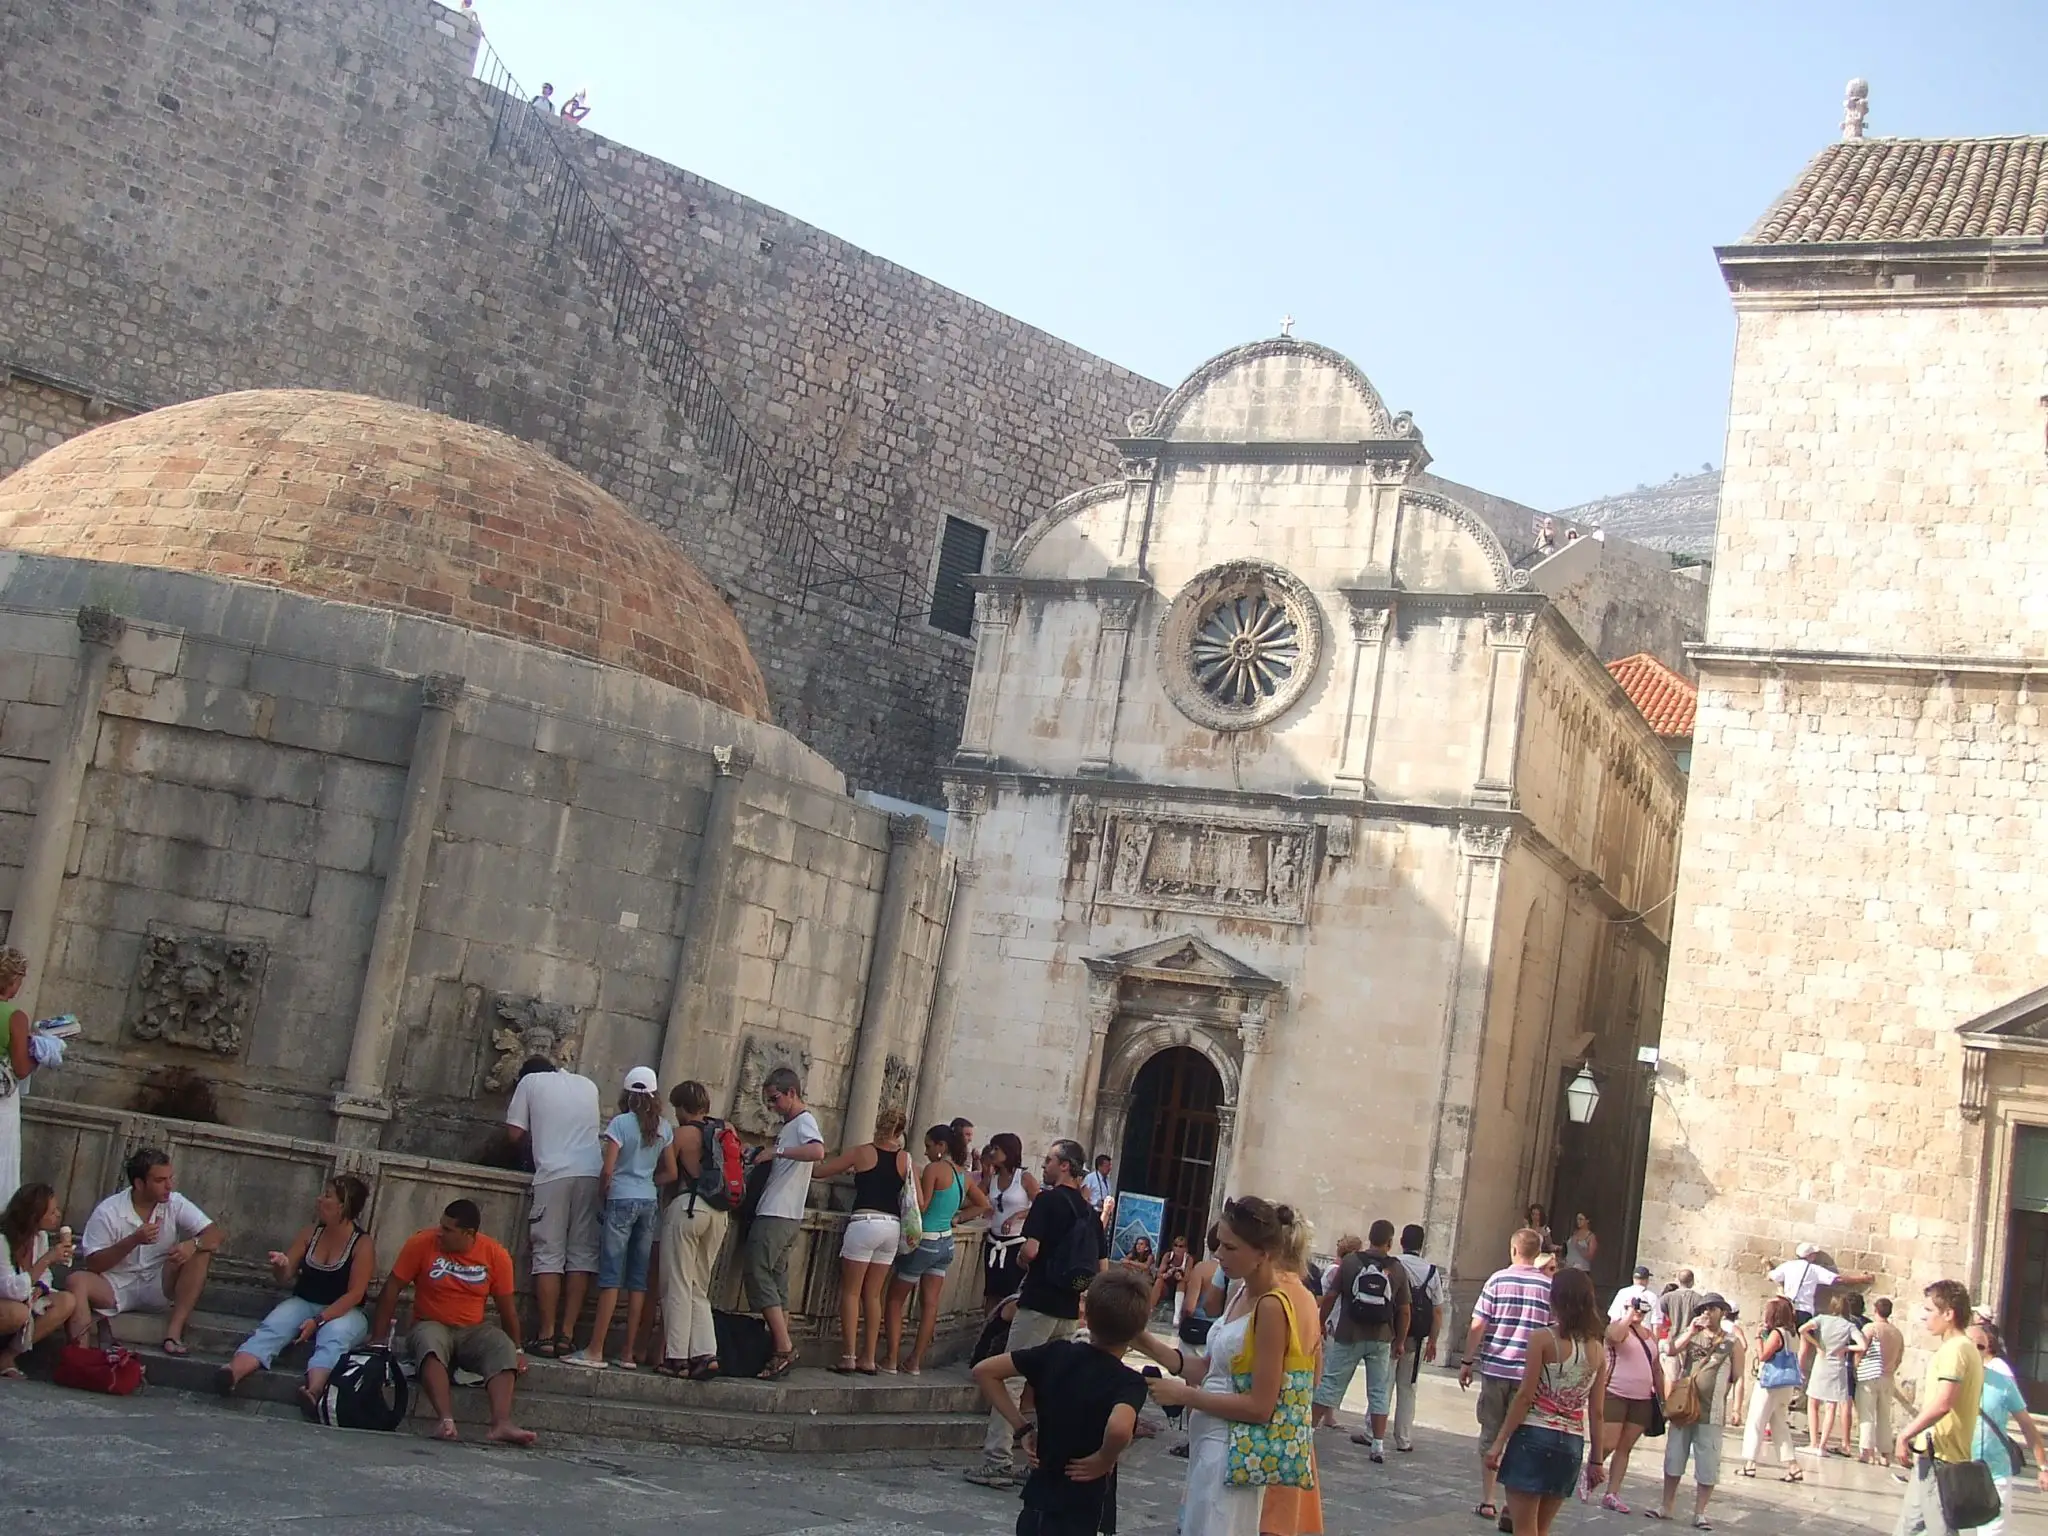 Does Dubrovnik have too many tourists?